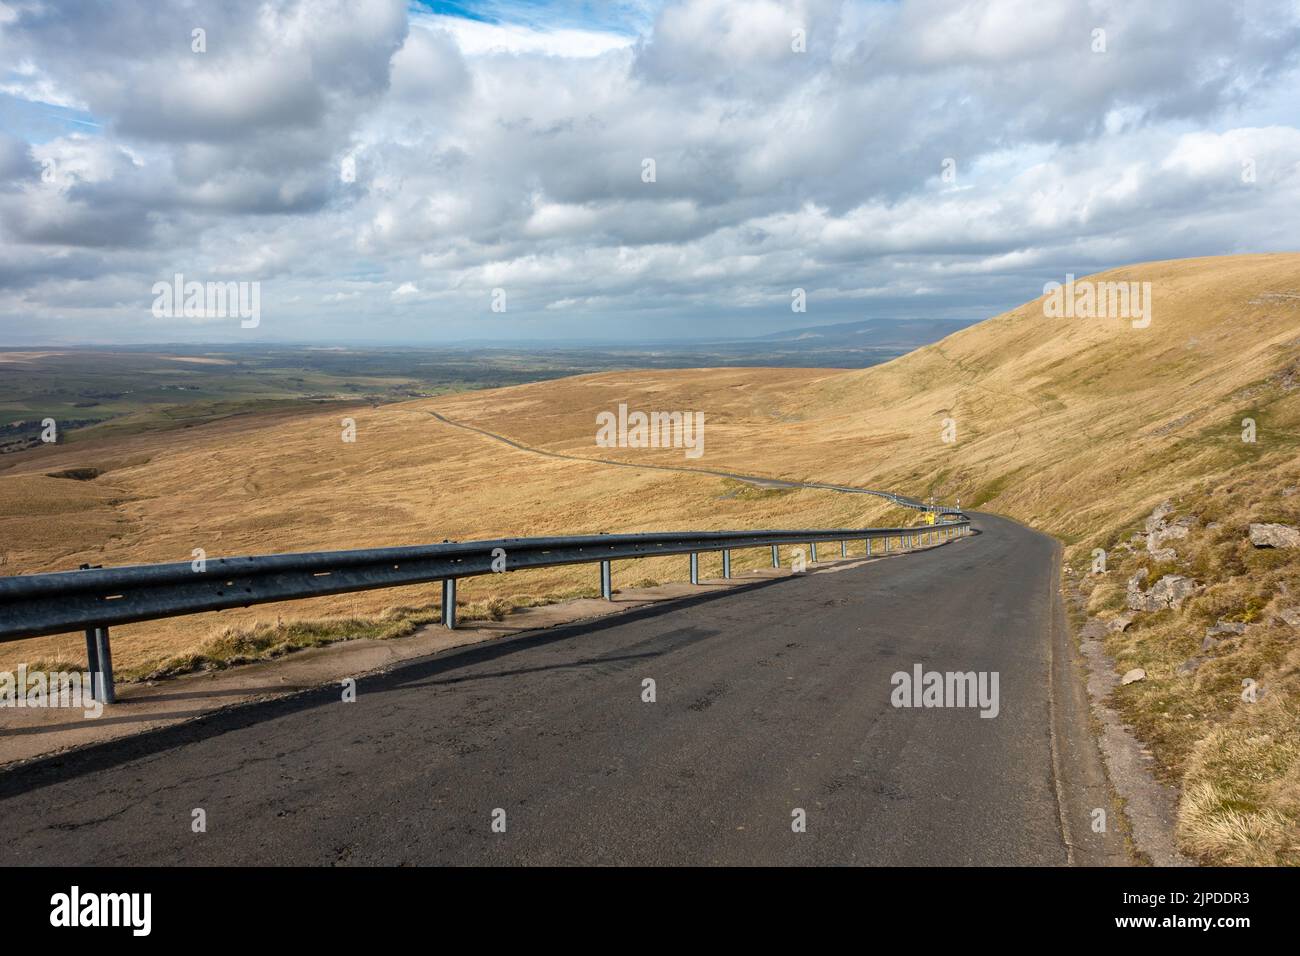 Landscape looking down Lamps Moss famous cycling hill on the B6270 road above Nateby, Yorkshire Dales National Park, England, UK Stock Photo